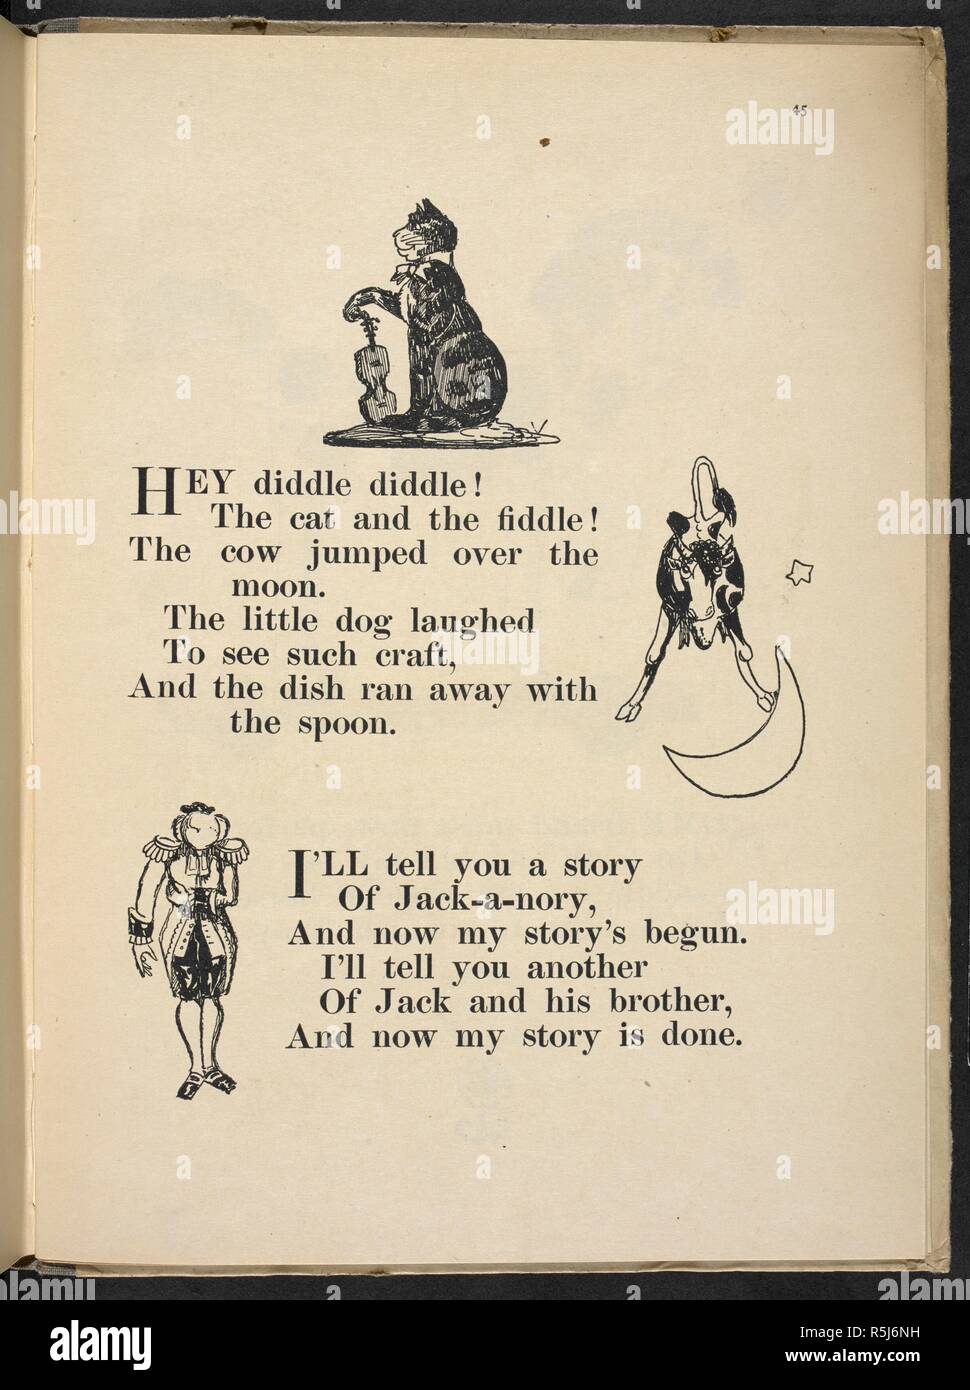 Hey diddle diddle! The cat and the fiddle! ...' 'Ill tell you a story of Jack-a-nory, ...'. Nursery Rhymes, with pictures by C. L. Fraser. London : T. C. & E. C. Jack, [1919]. Source: 12800.ddd.31 page 45. Author: Fraser, Claud Lovat. Stock Photo